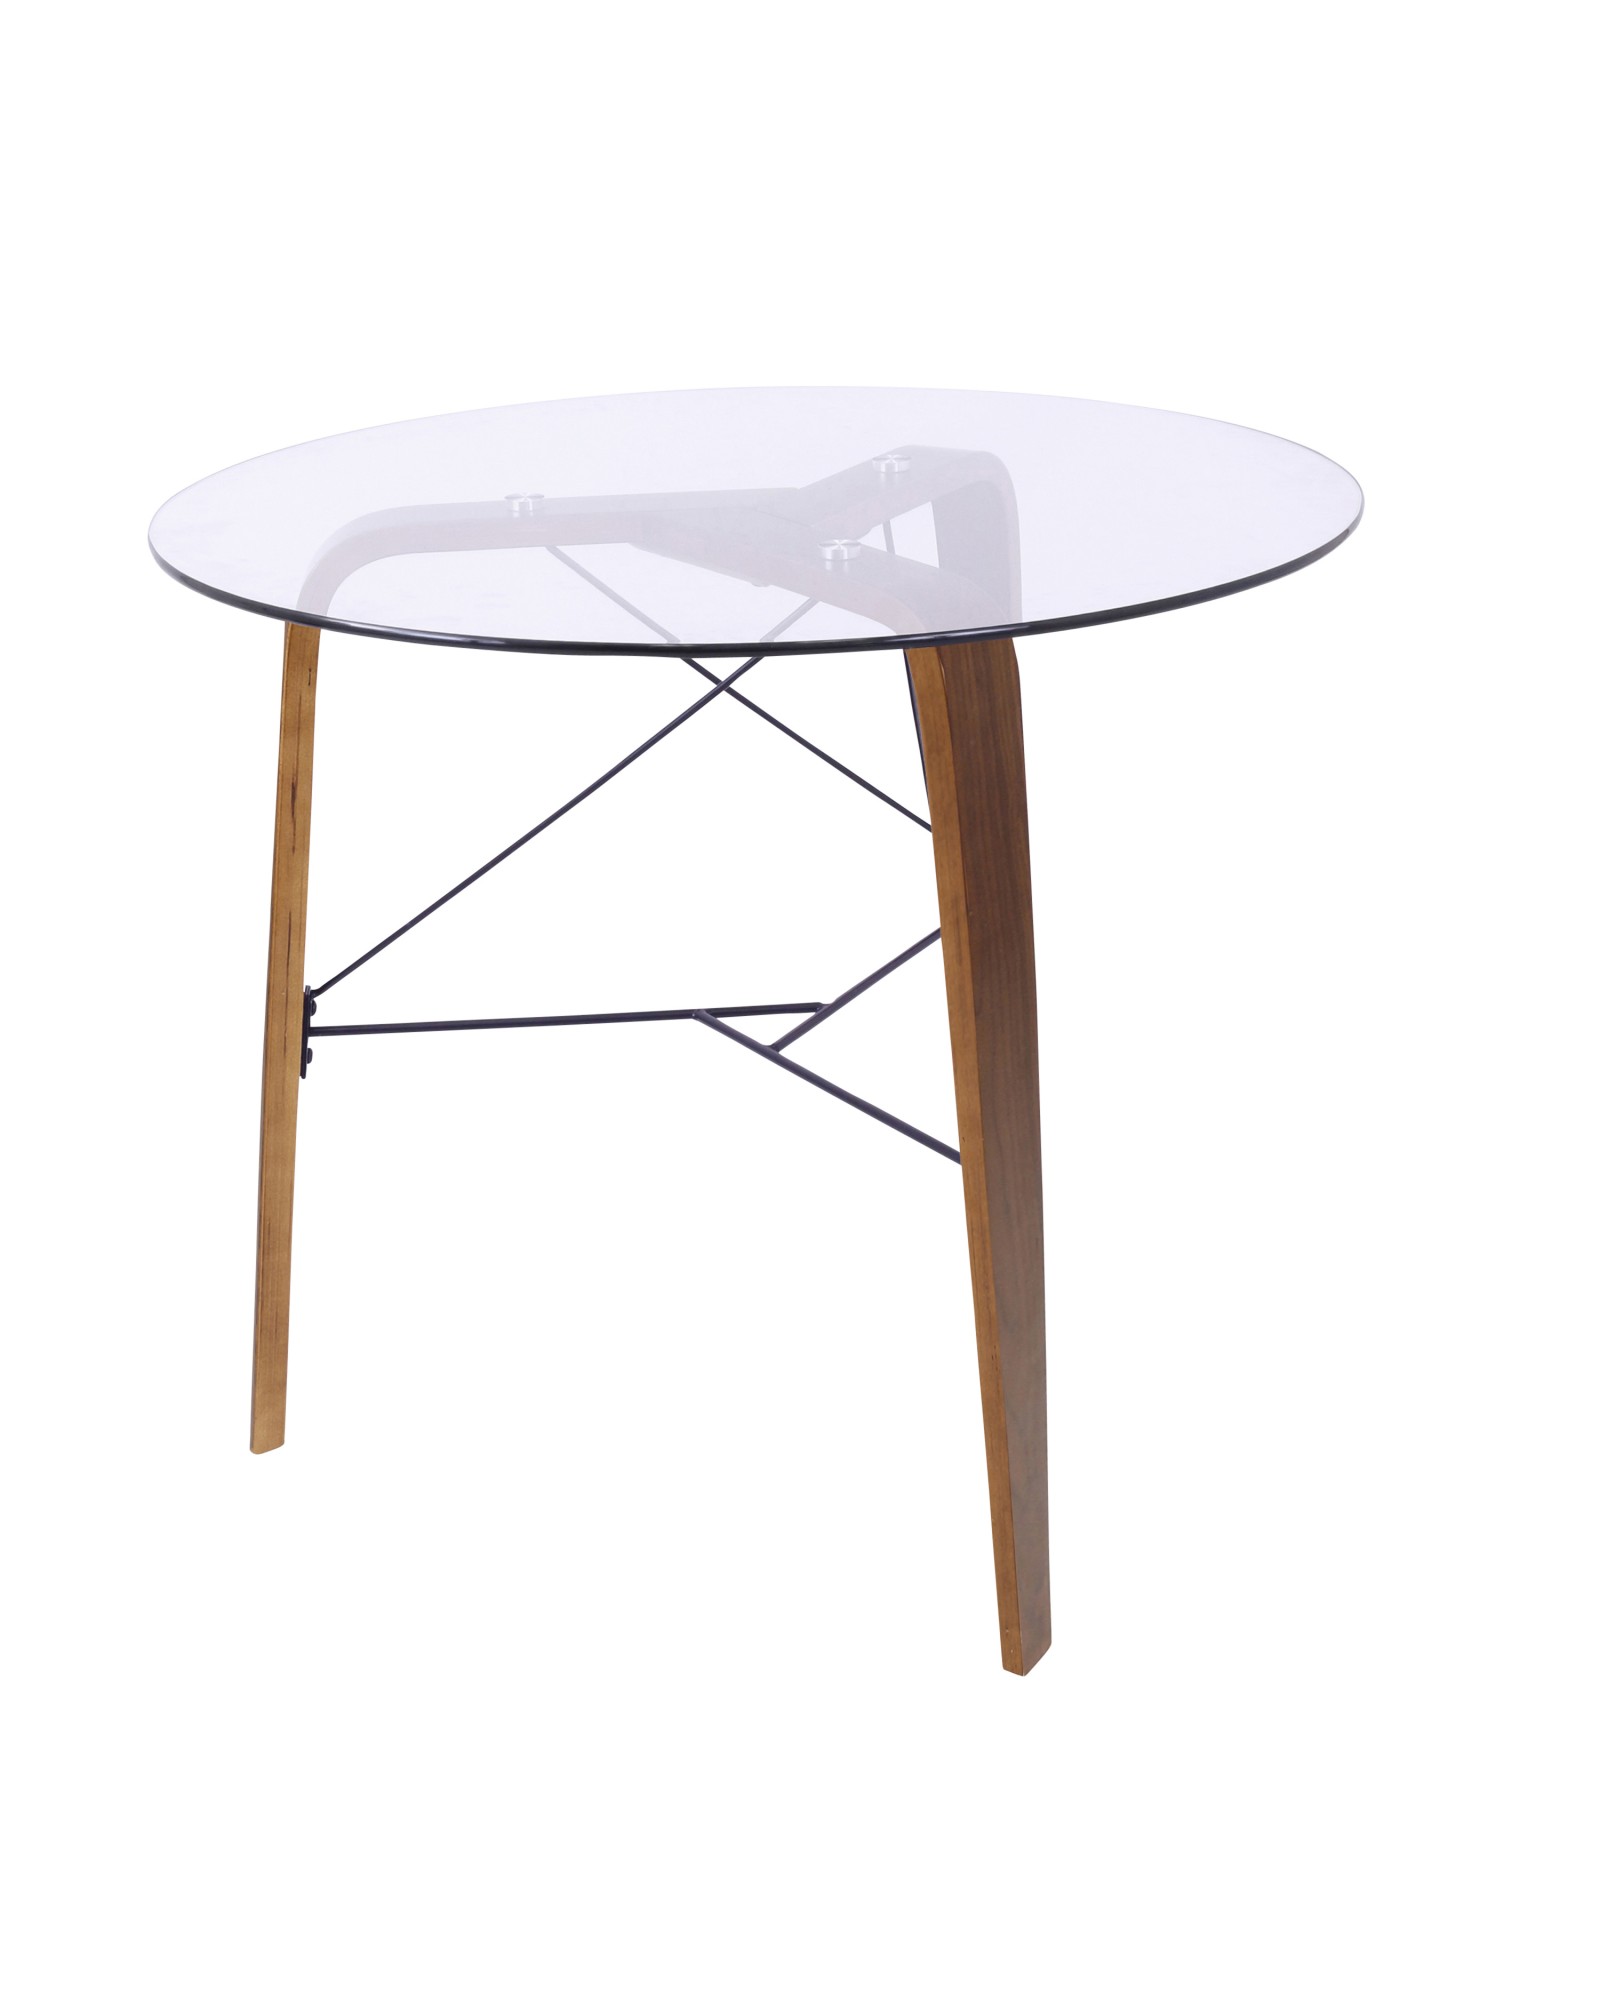 Trilogy Contemporary Round Dining Table in Walnut Wood and Clear Glass